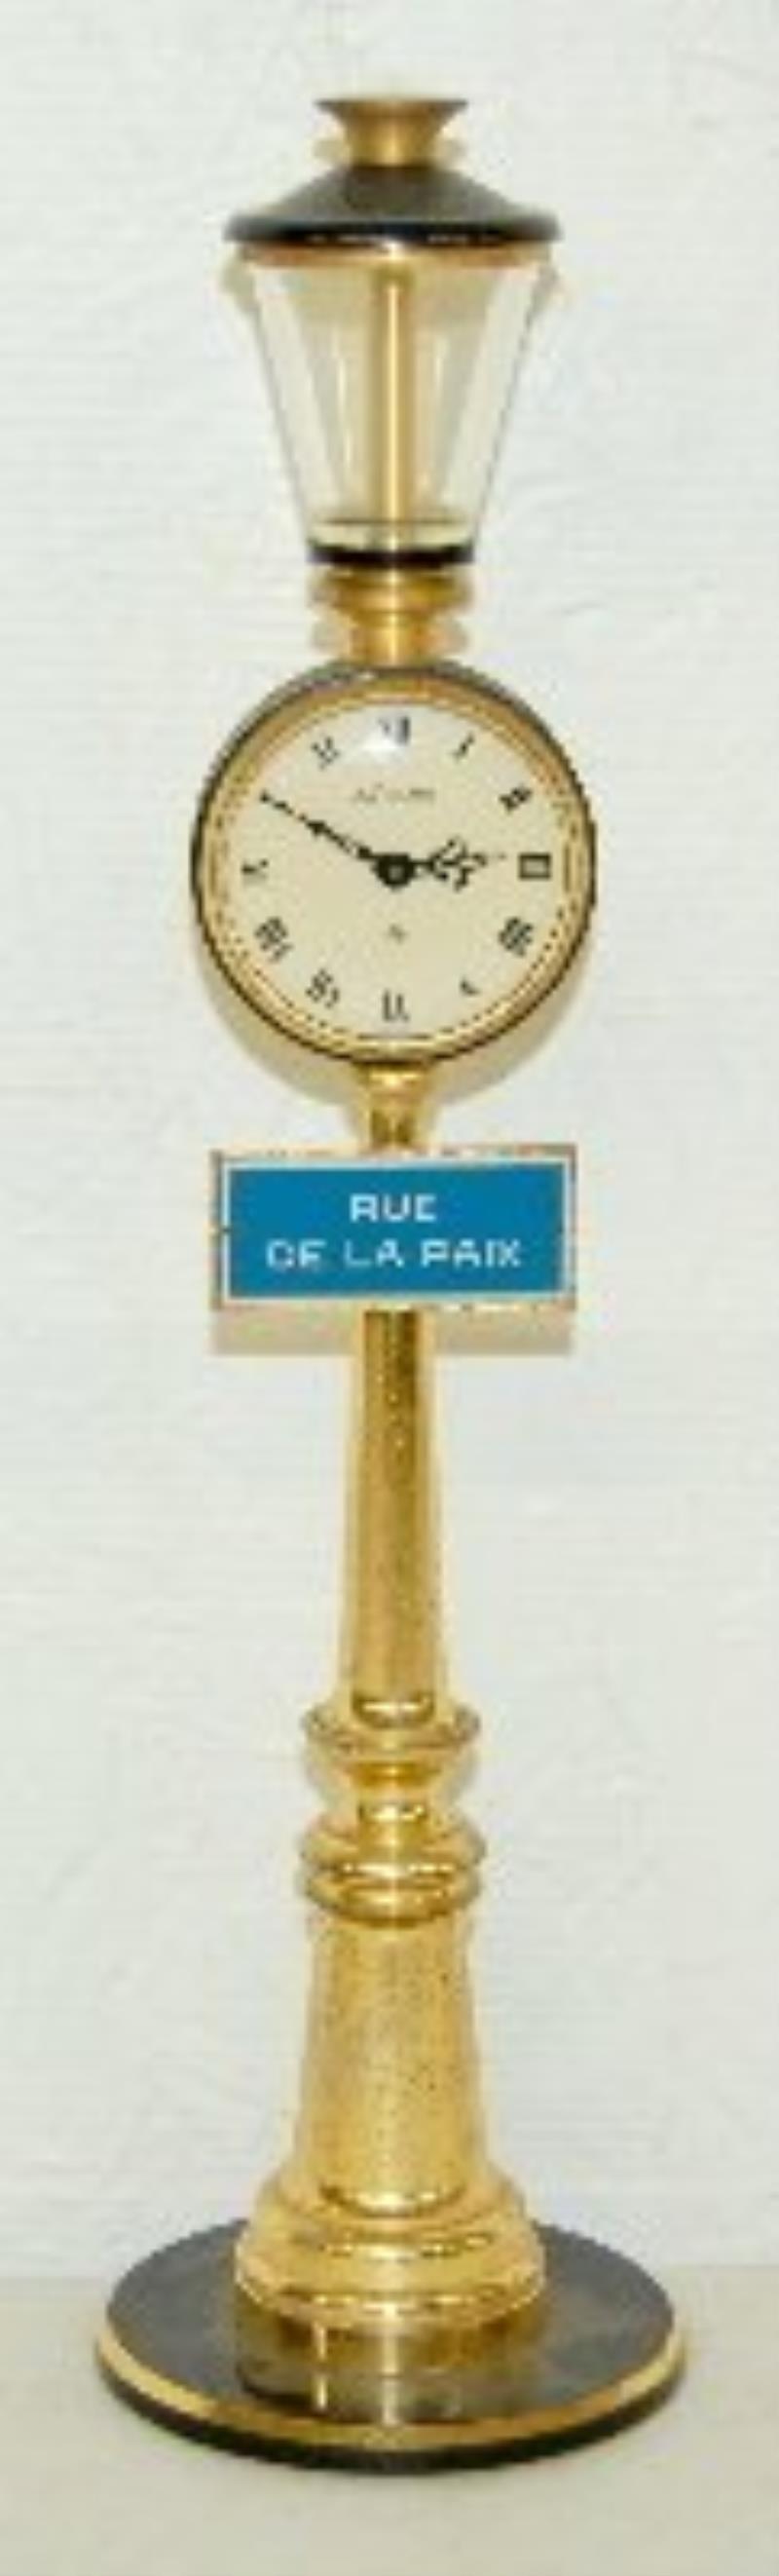 LeCoultre Street Lamp Clock and Sign